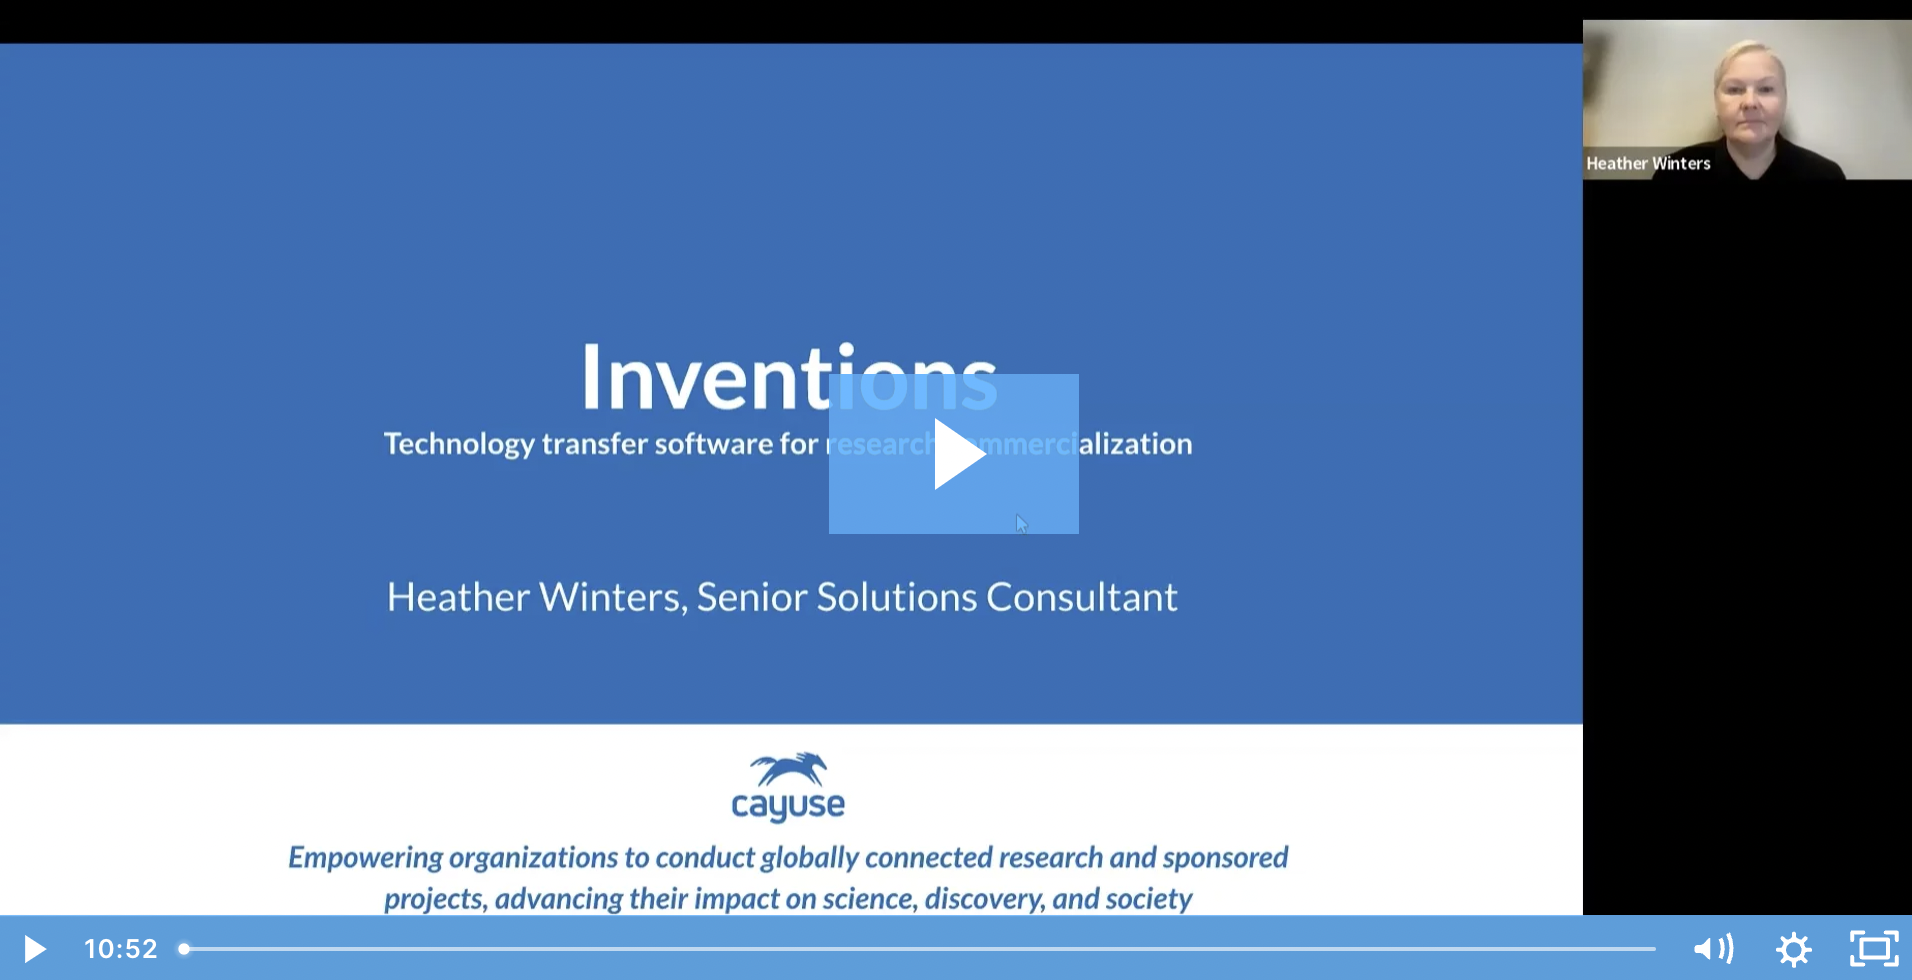 Thumbnail of Inventions demo video